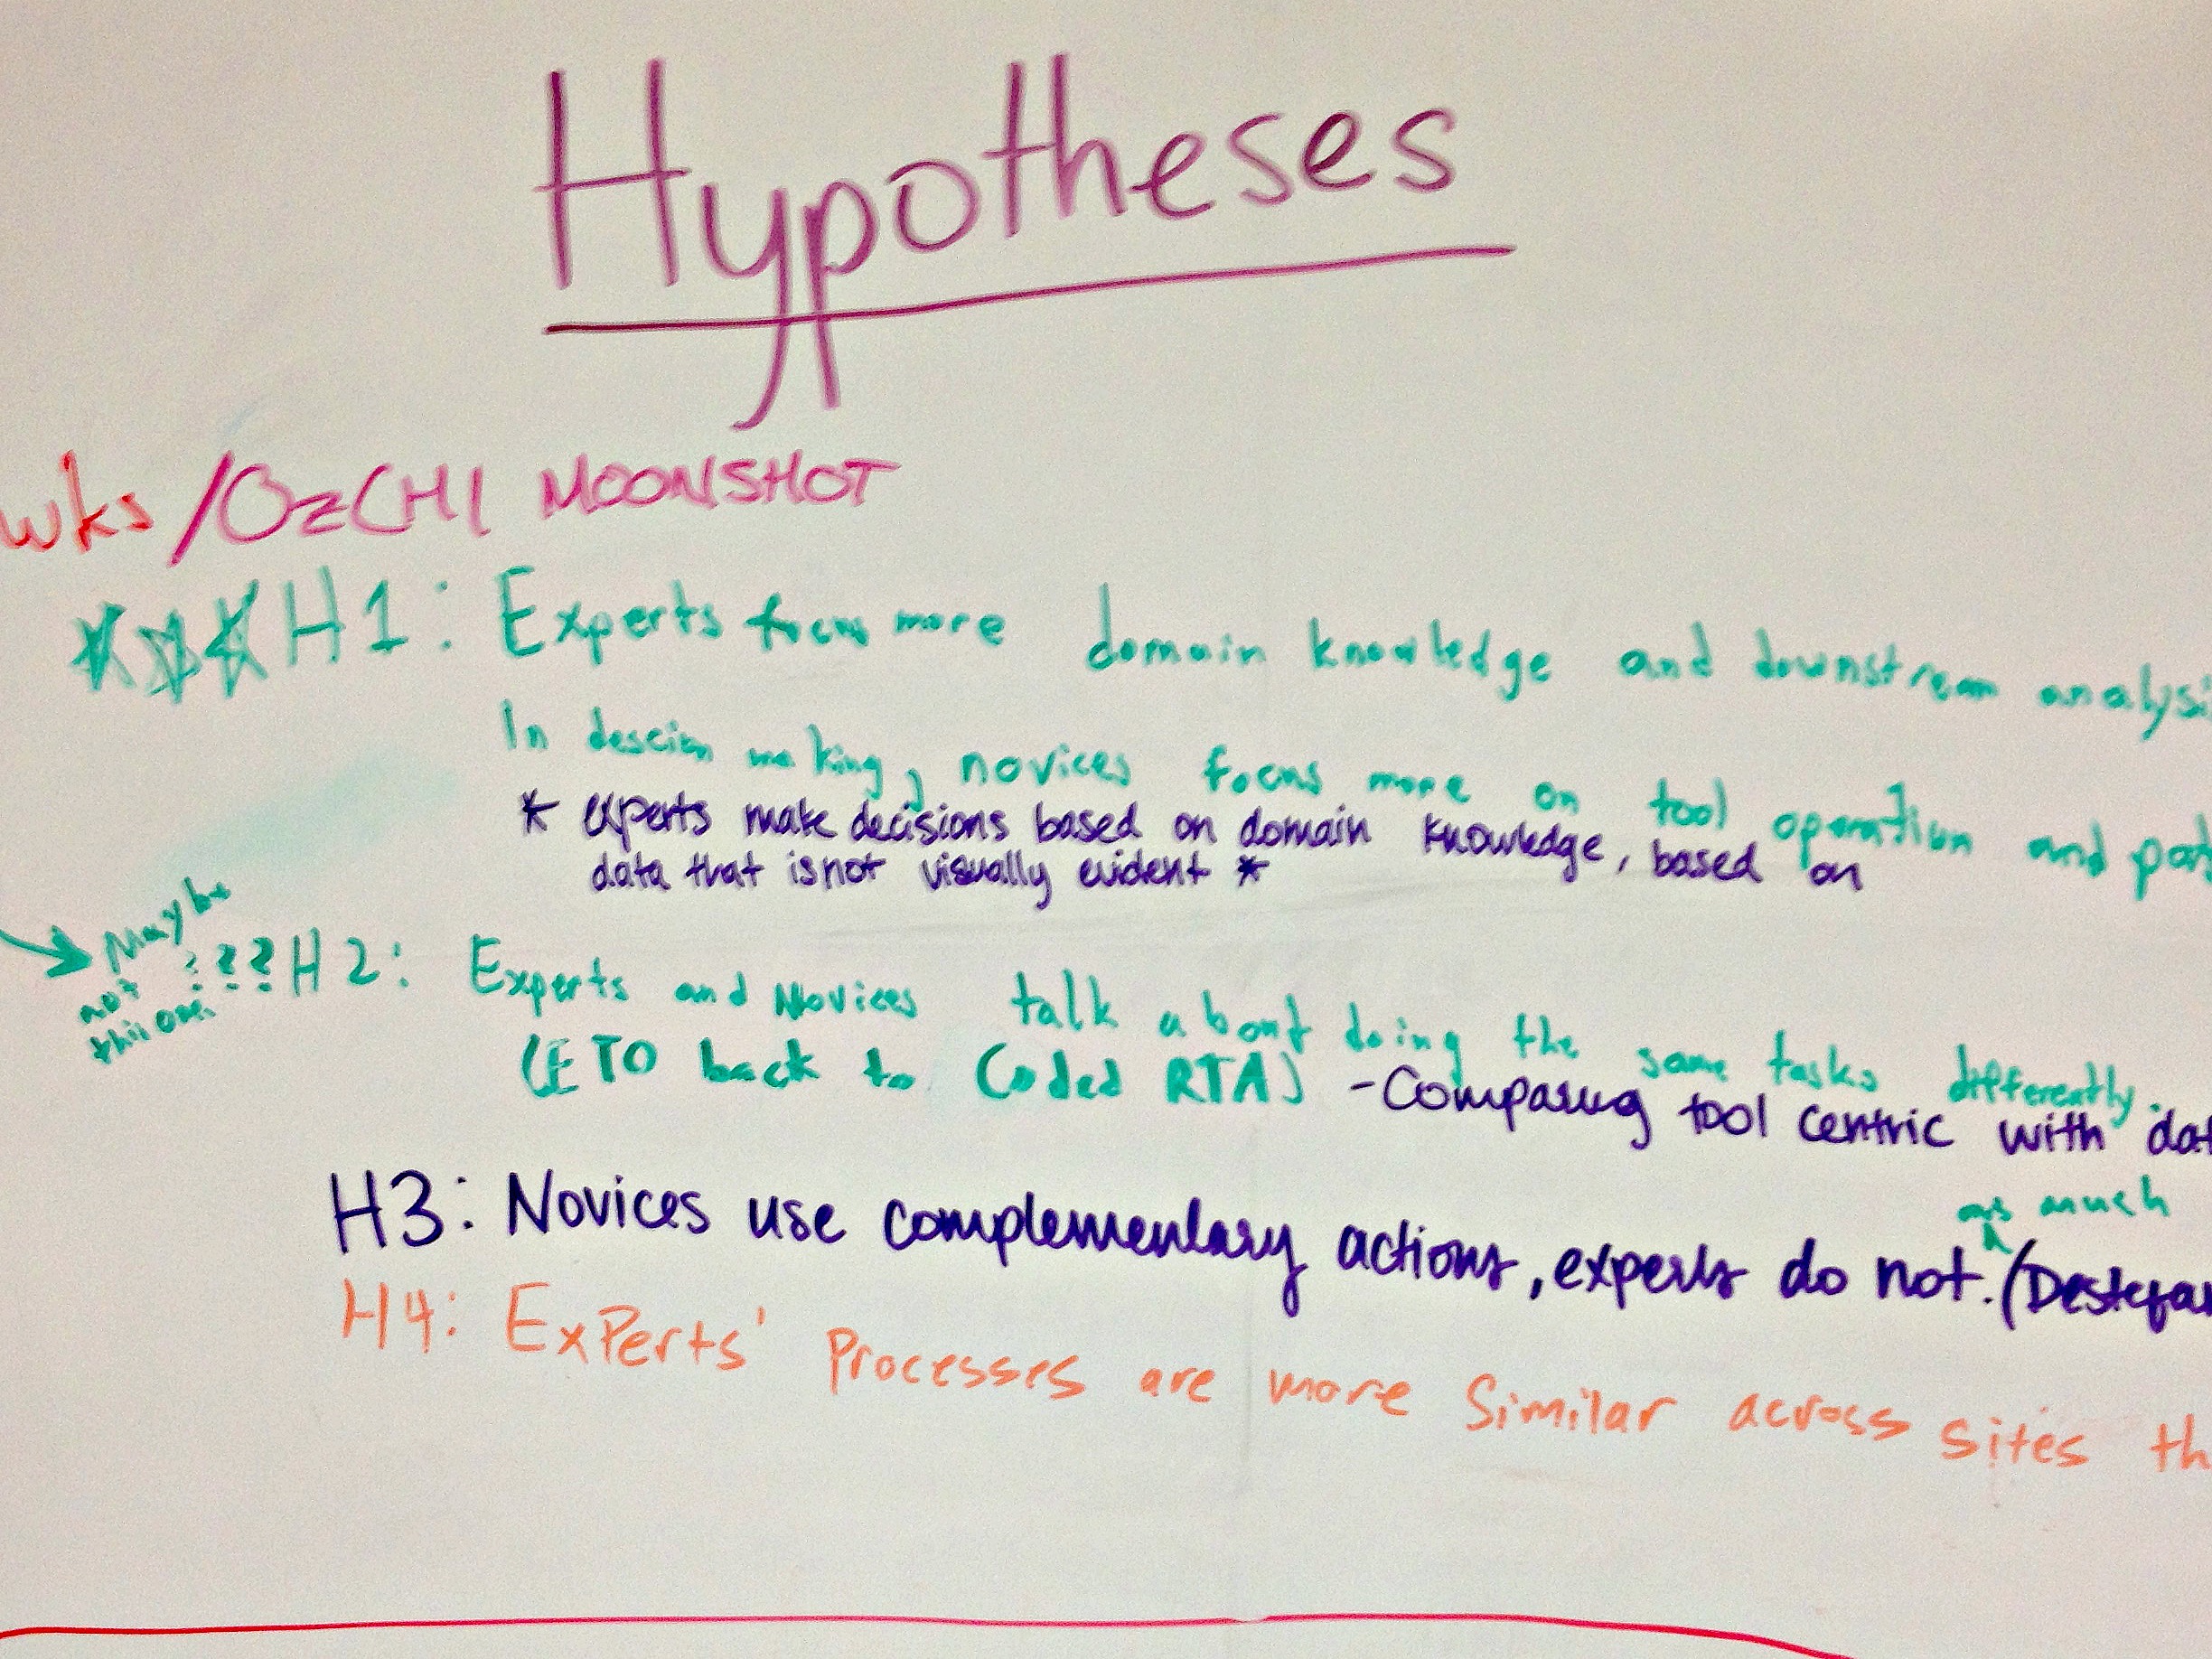 hypotheses